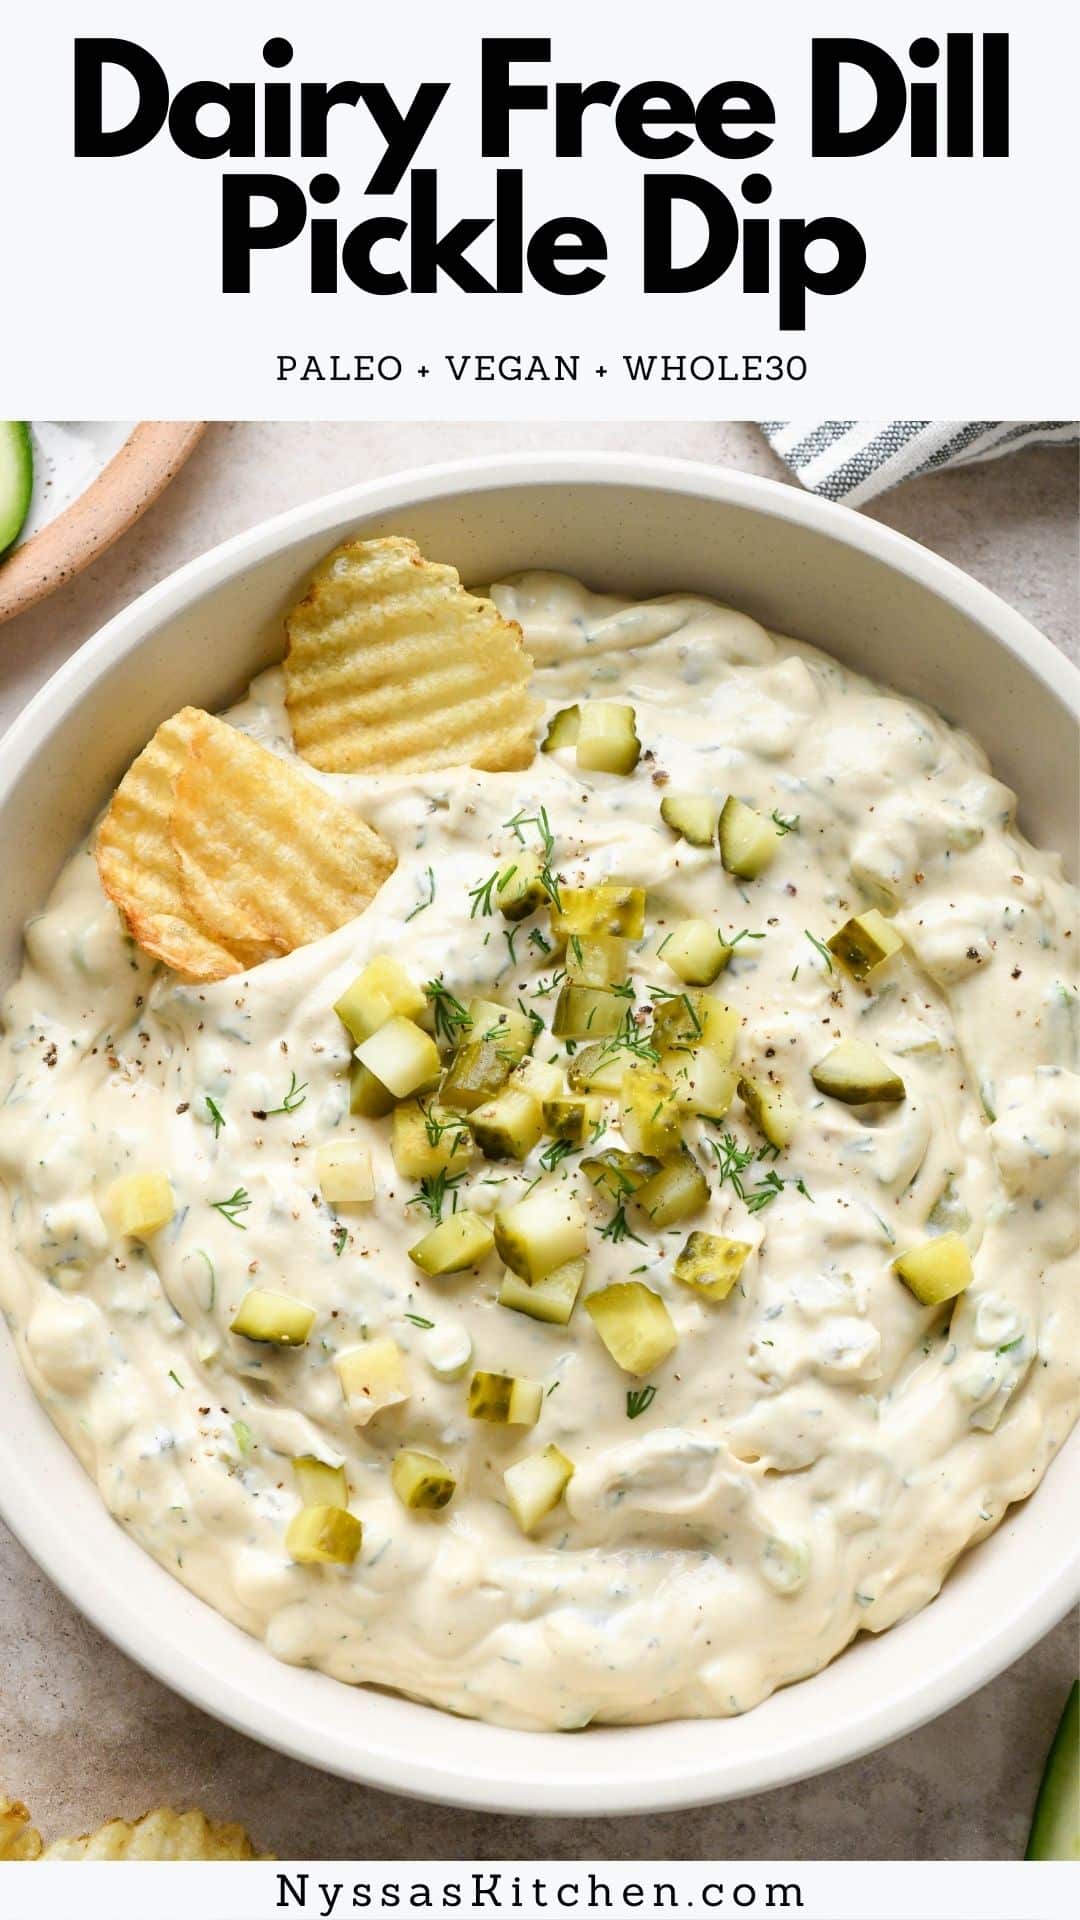 This dairy free dill pickle dip is a delicious version of every pickle lovers dream dip! No sour cream, cream cheese, or dairy needed for a super creamy texture. Perfect for snacking, potlucks, and summer bbq's. Made with raw cashews, coconut aminos, nutritional yeast, dried spices, fresh dill, and plenty of pickles! Dairy free, vegan, paleo, and Whole30 compatible.